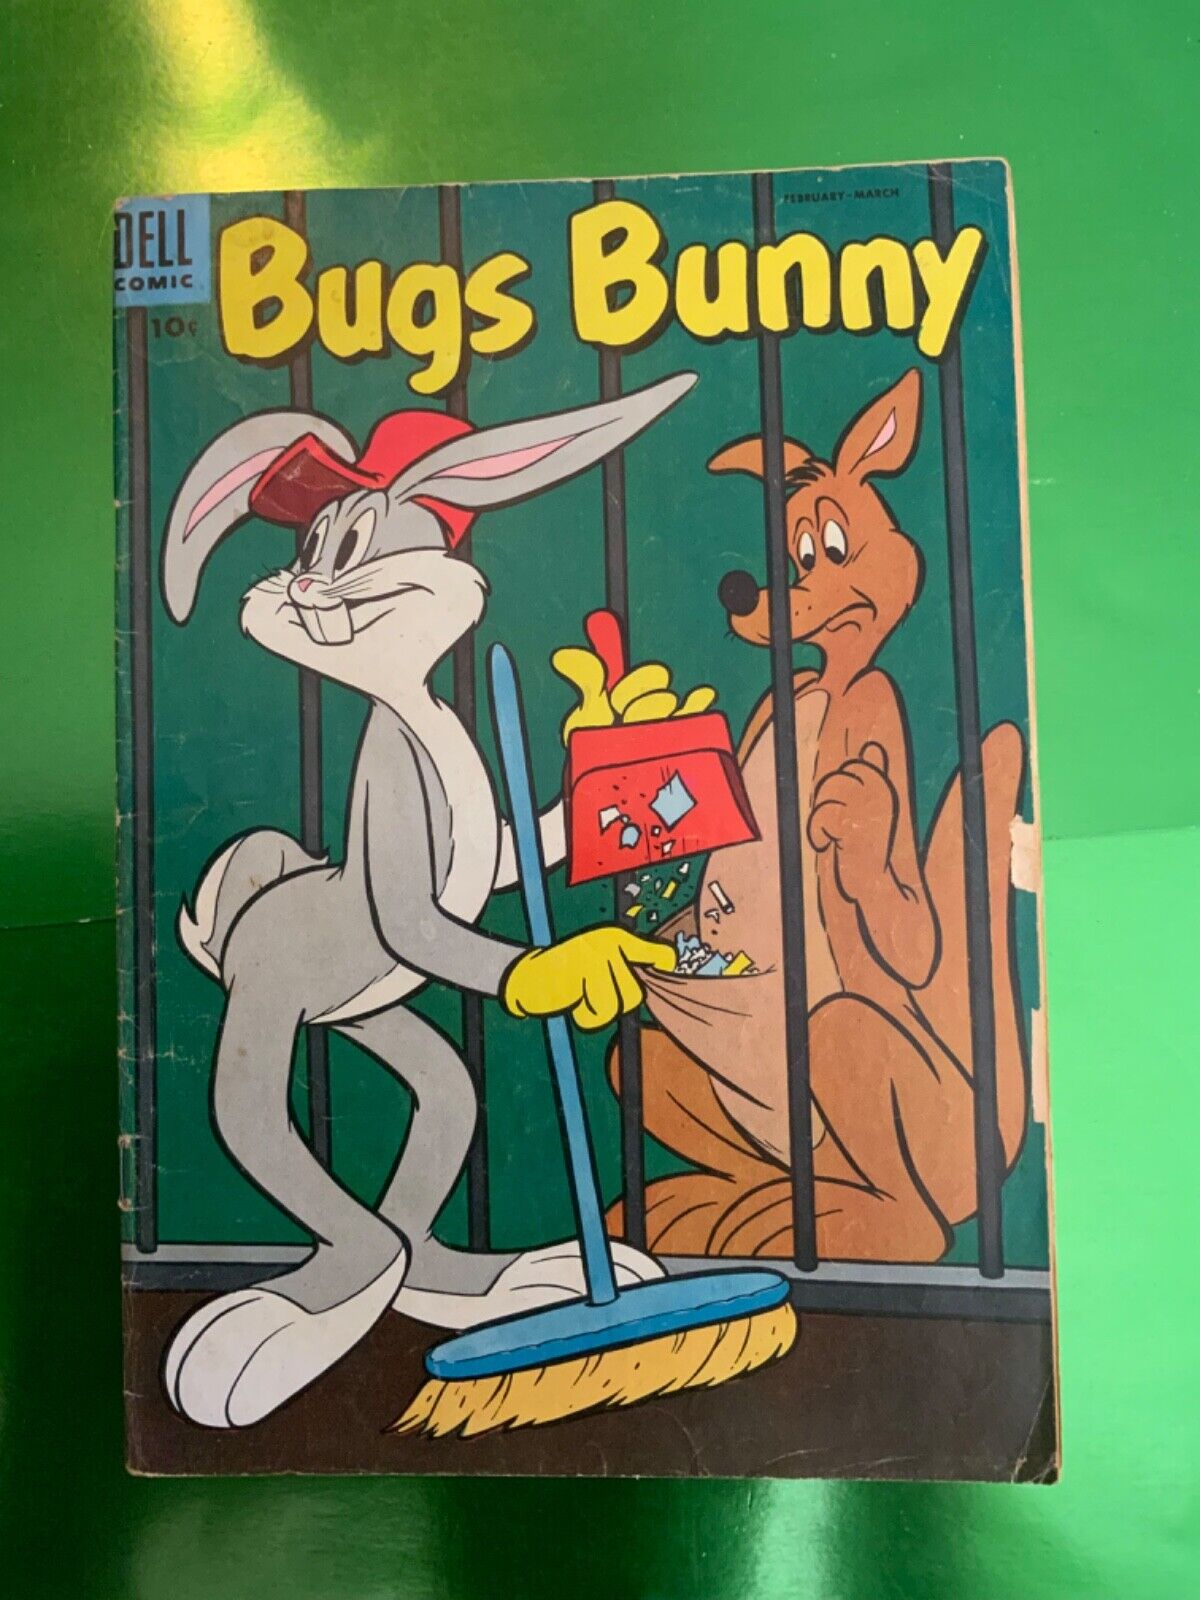 BUGS BUNNY BLOWOUT SALE Bugs Bunny #41 (FEB/MARCH 1955) DELL KANGAROO COVER